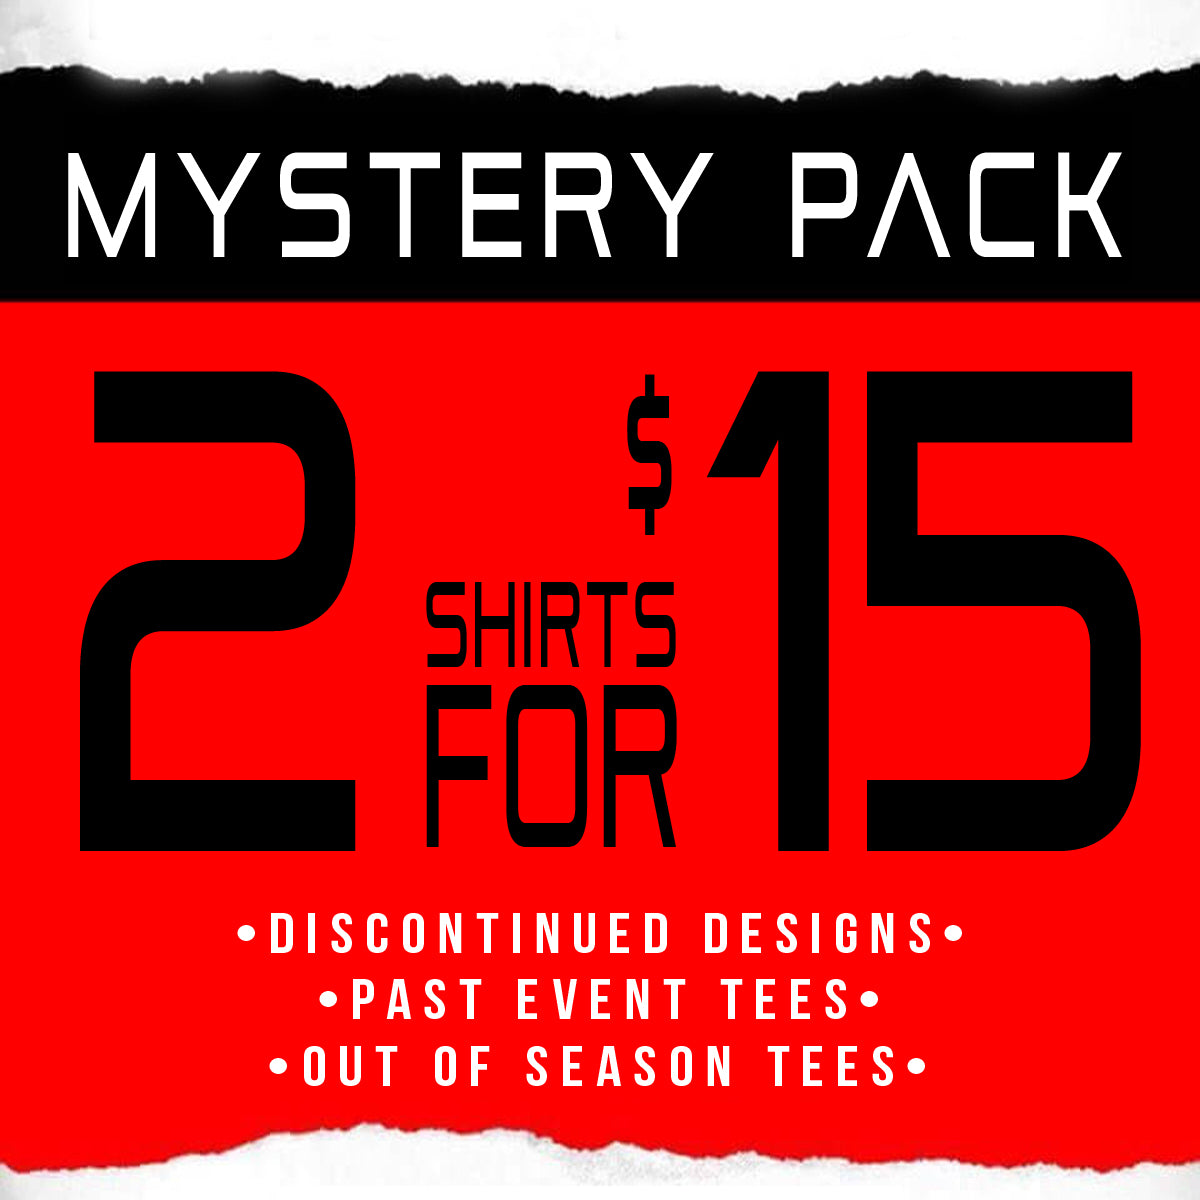 Men's 2 for $15 MYSTERY PACK T-Shirts